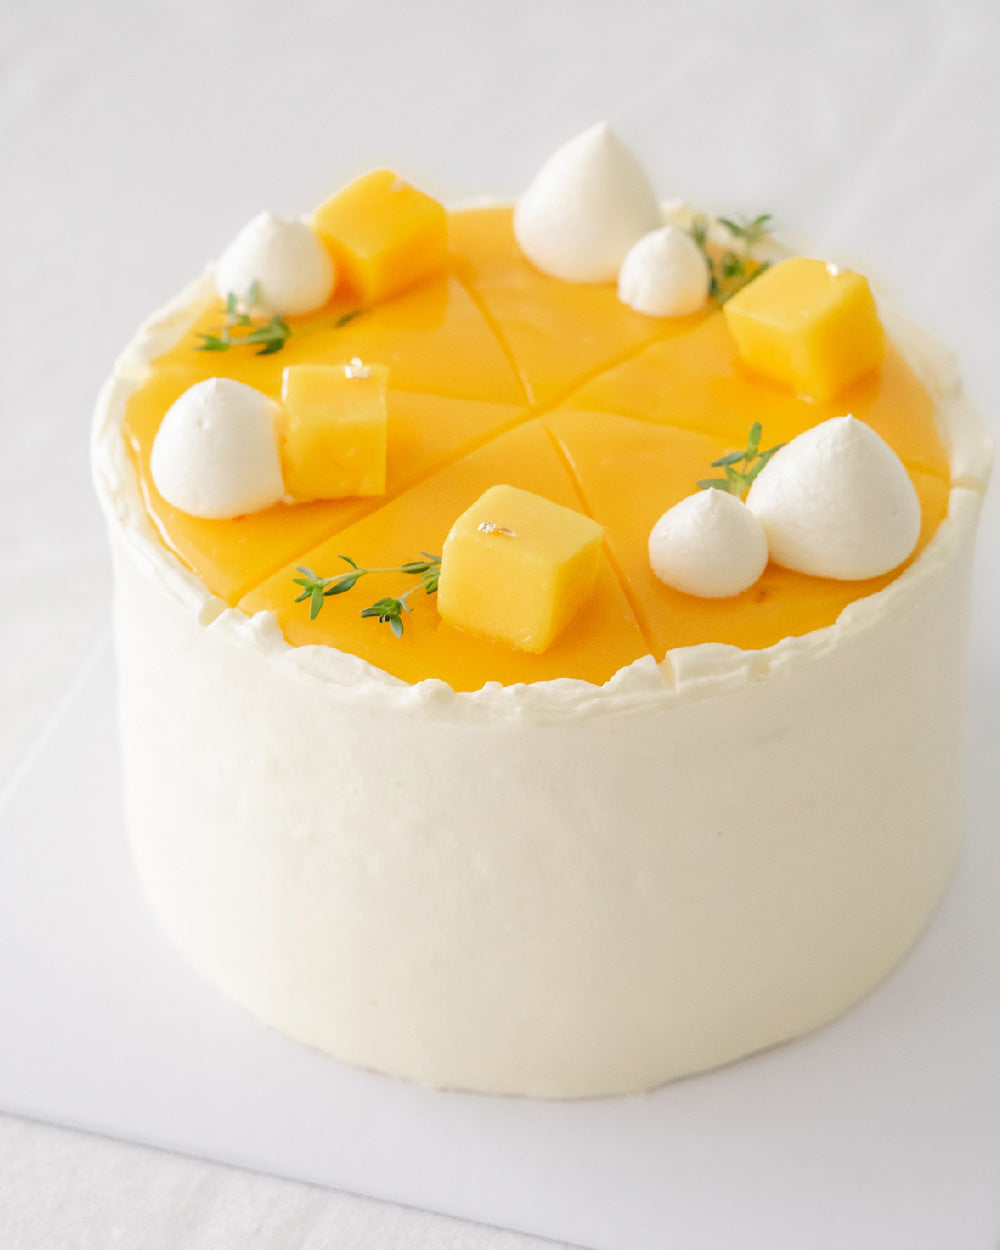 Mango Cake Delivery to KL & Selangor